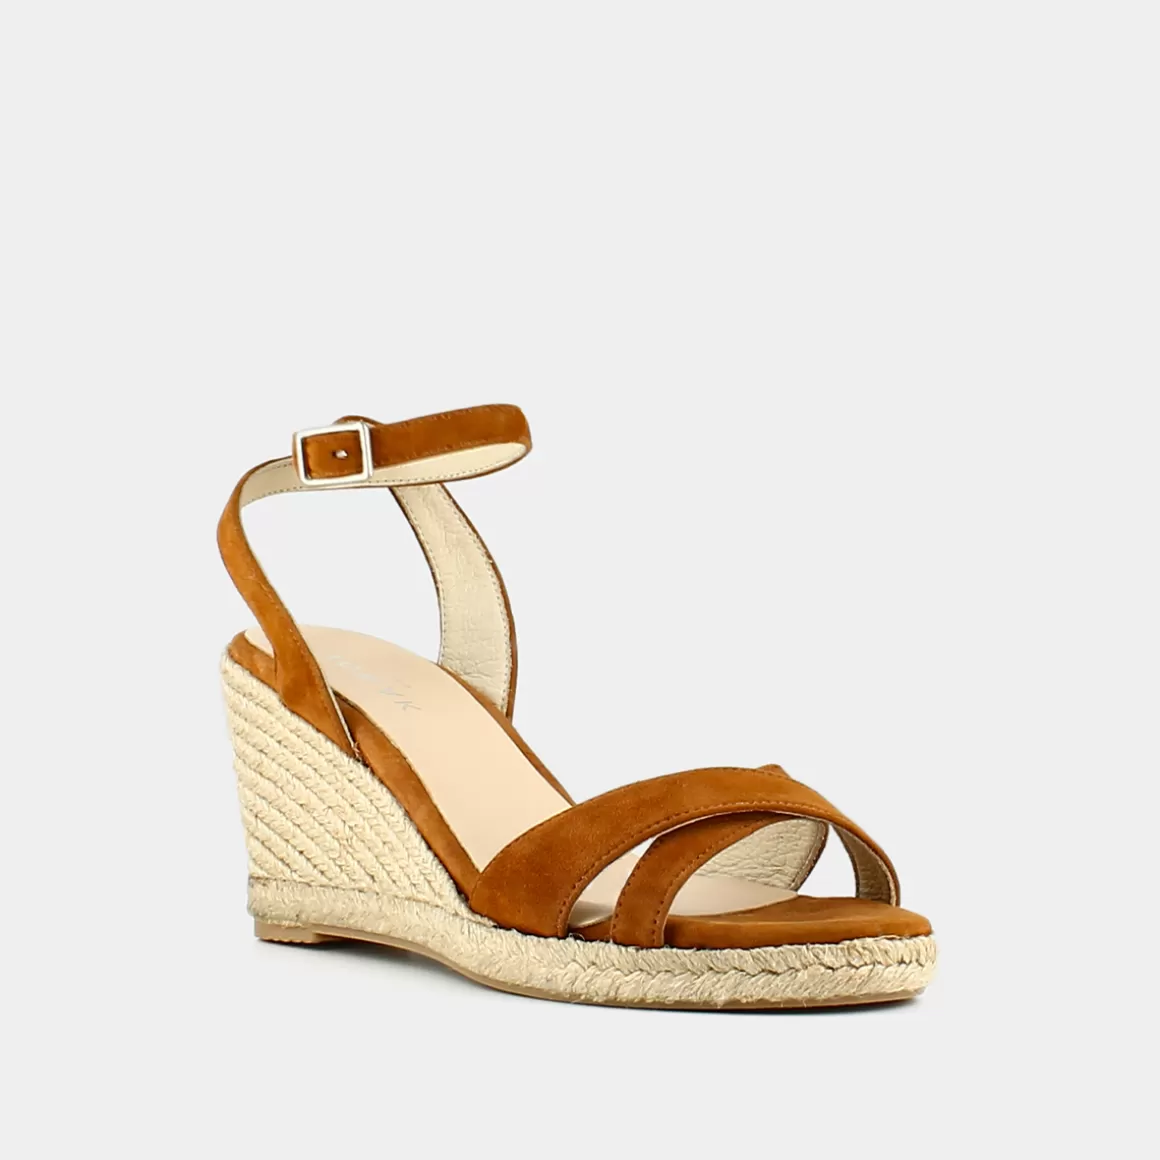 Espadrilles with high heels and straps<Jonak Hot